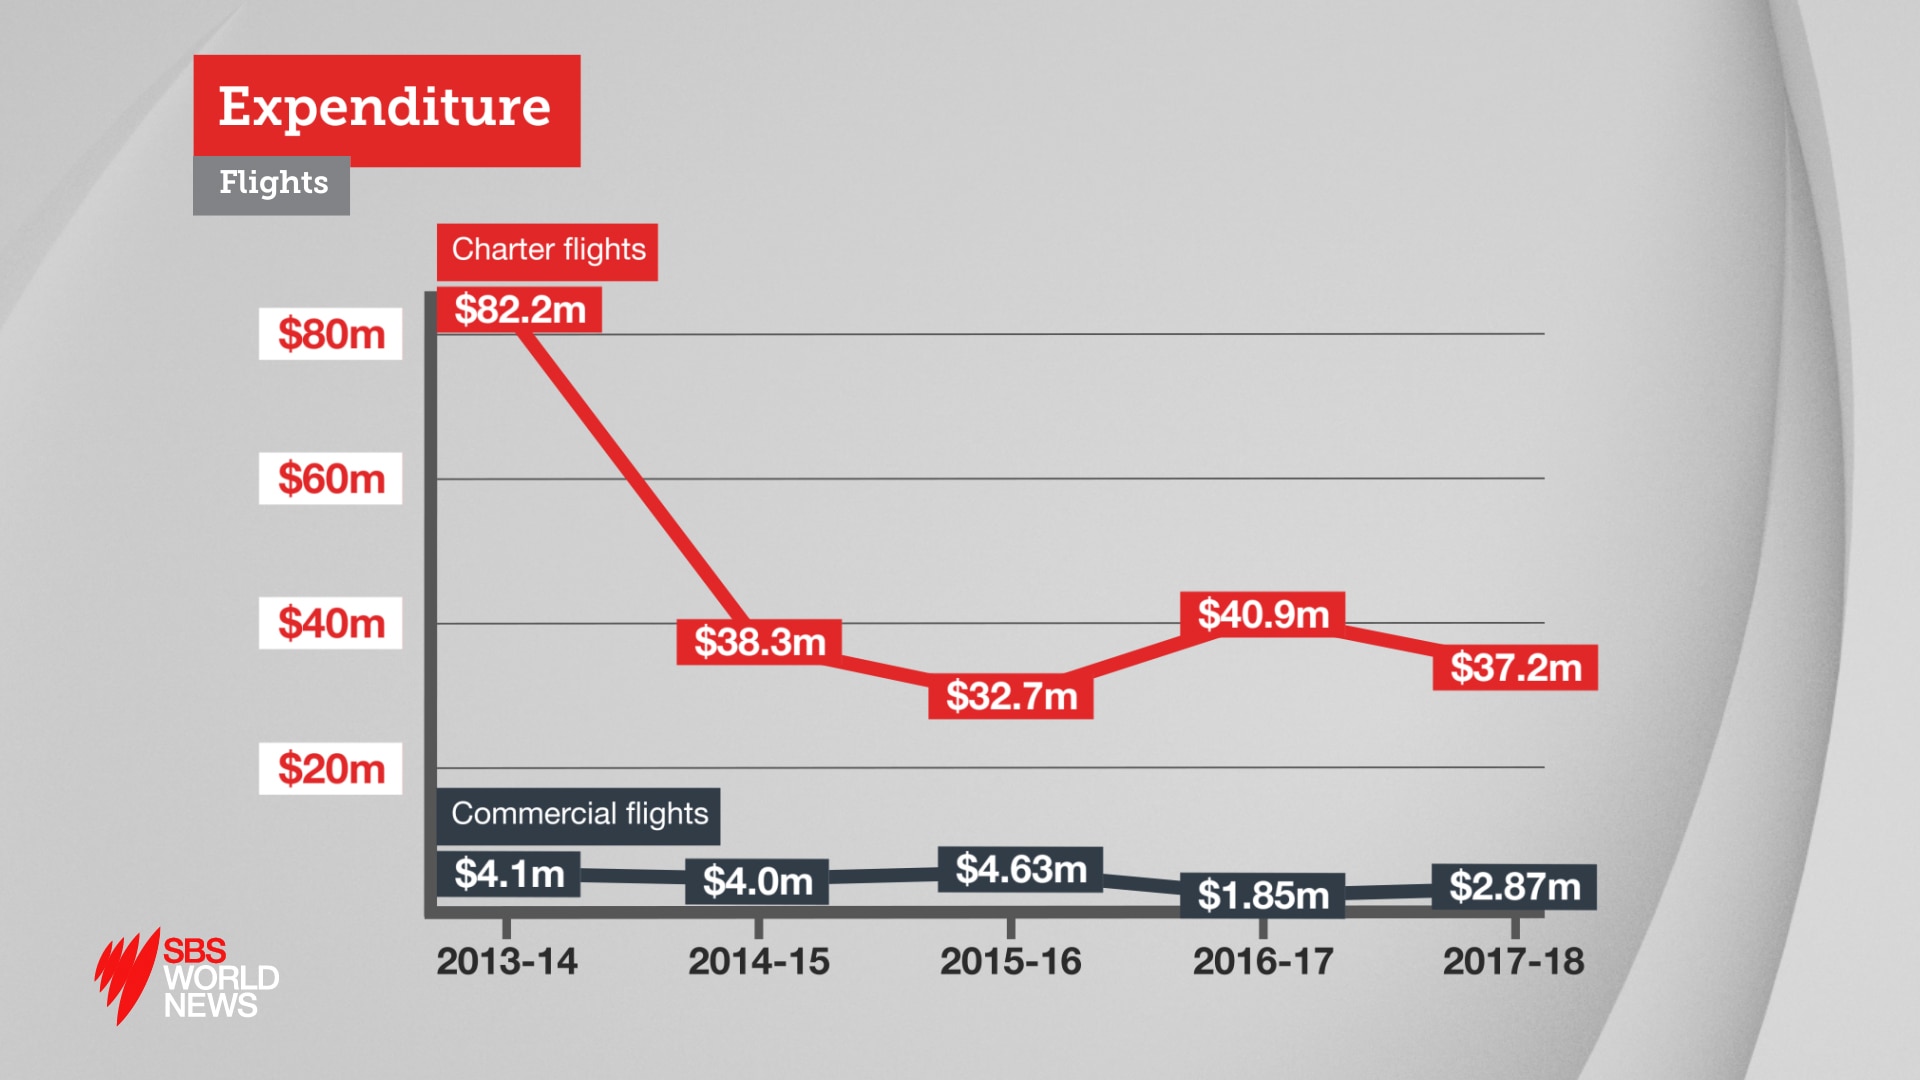 Spending on commercial and charter flights.